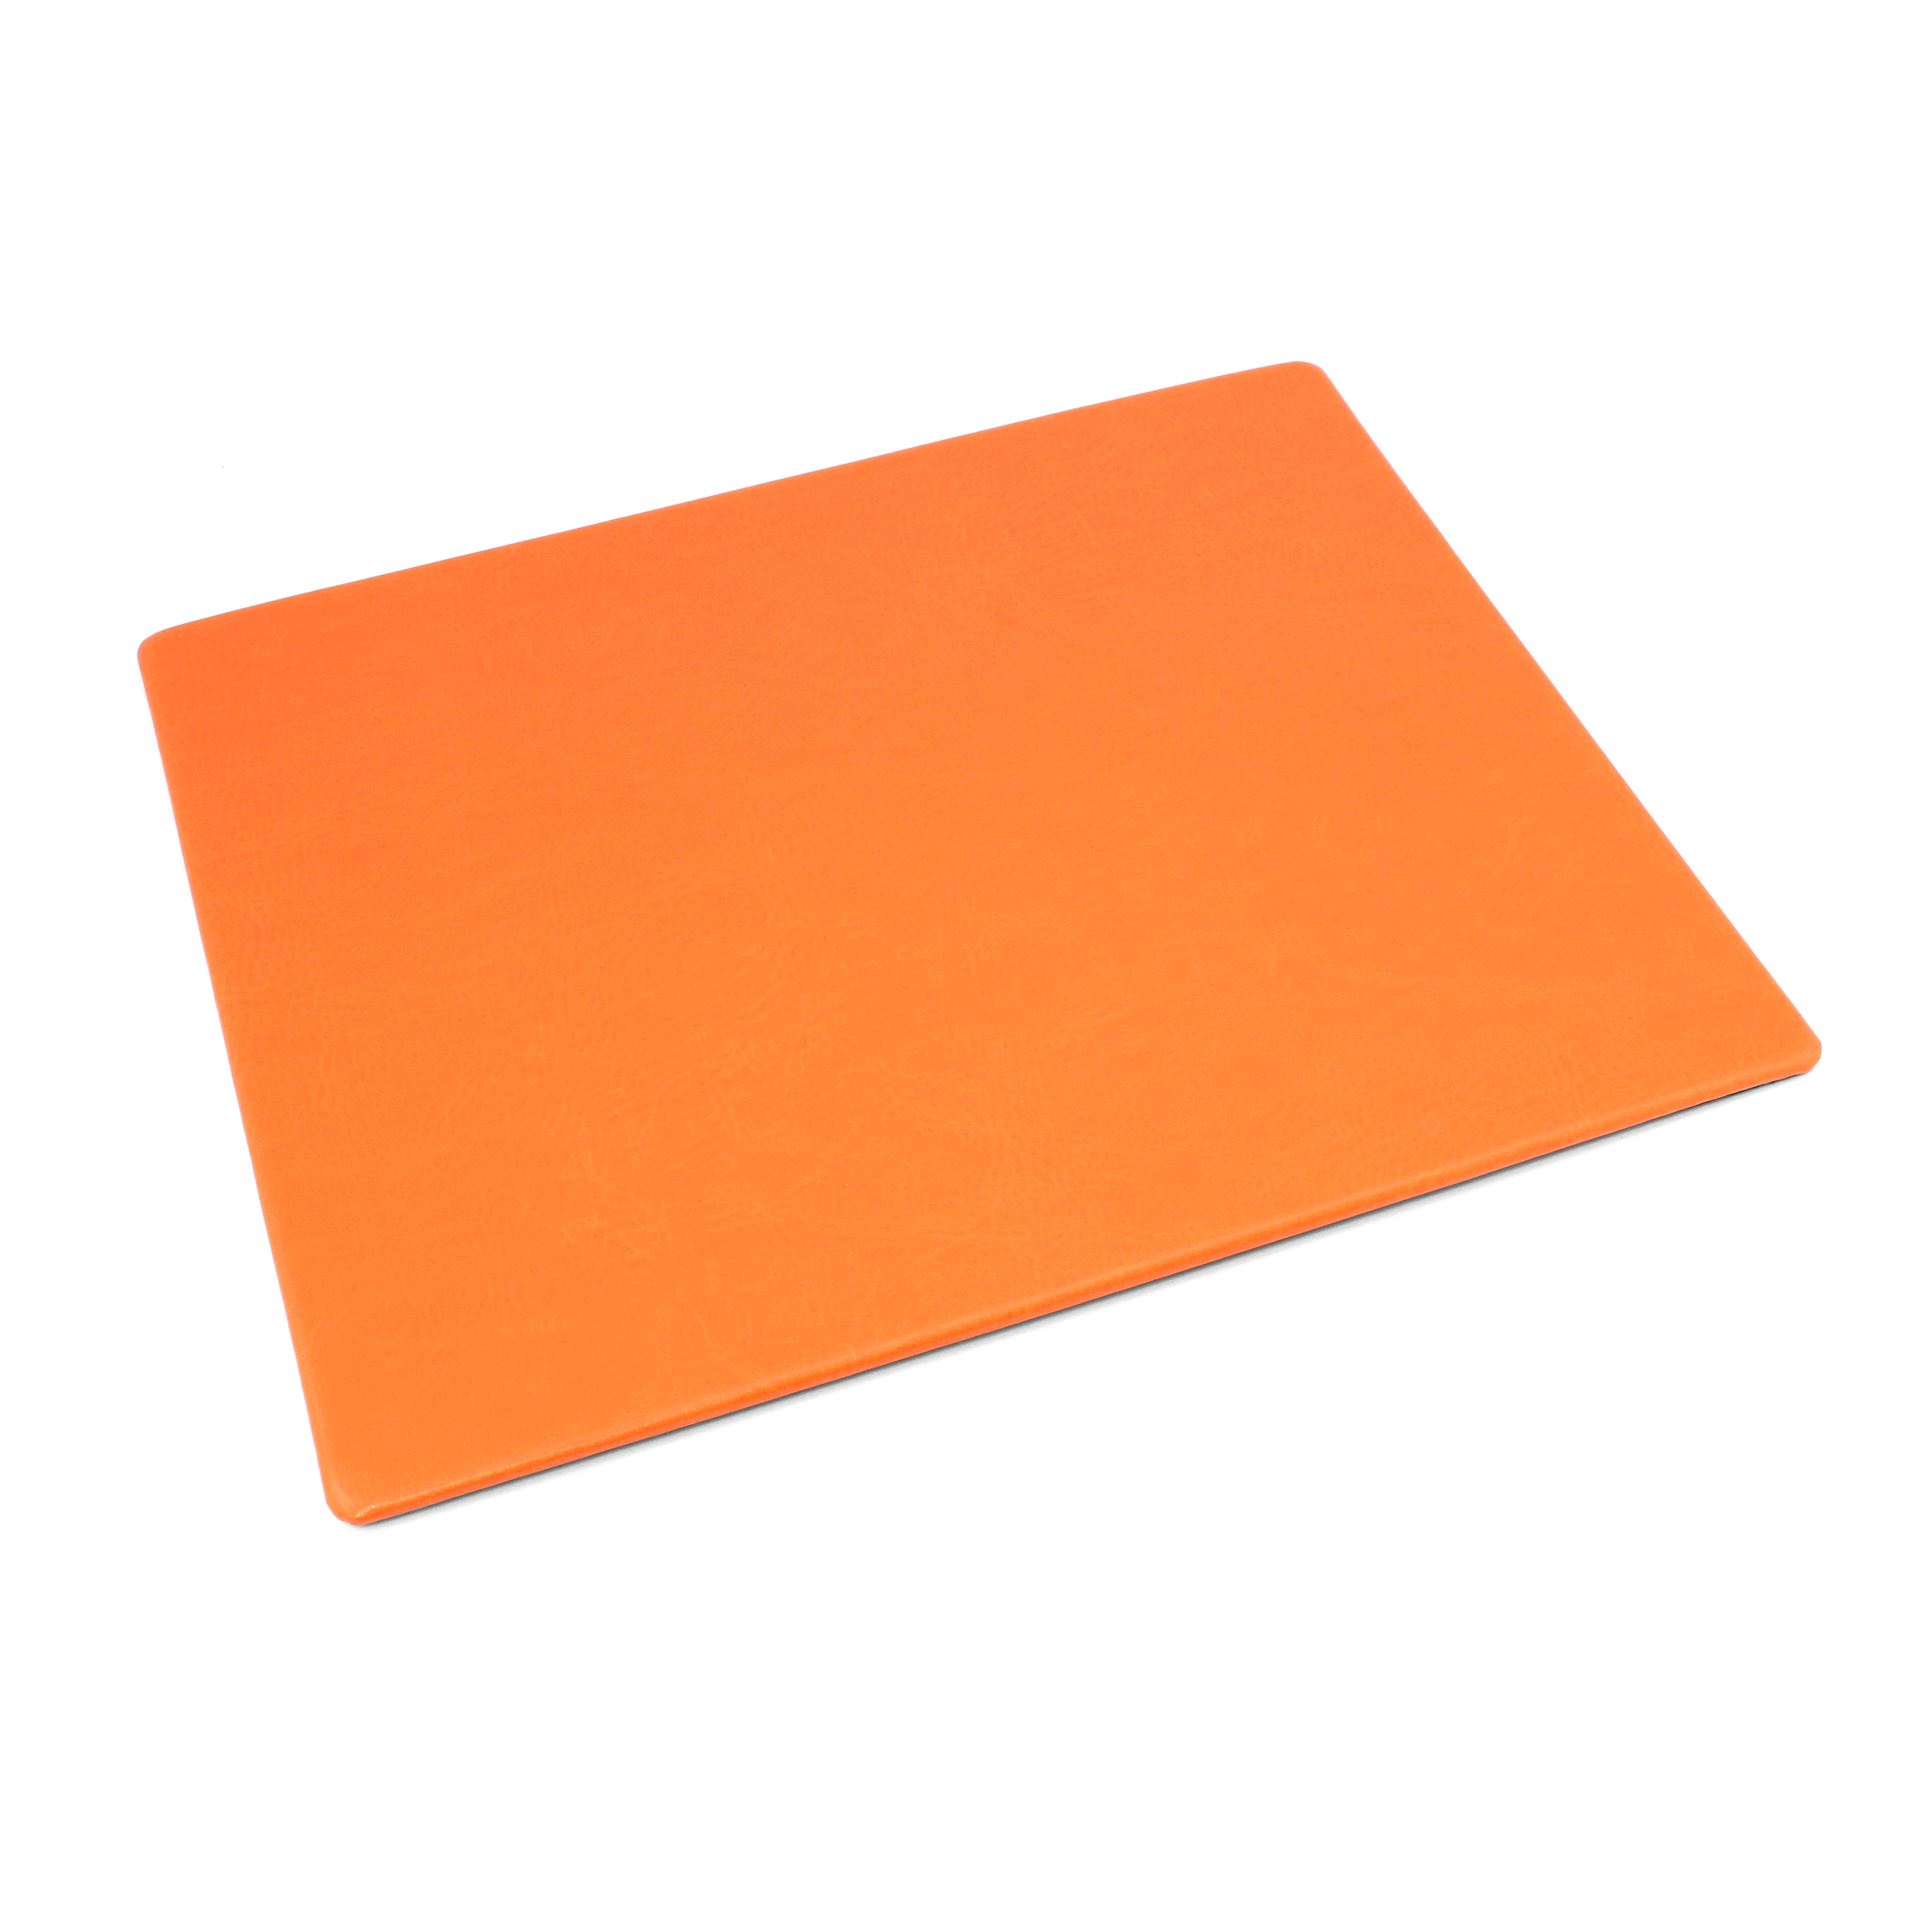  Mouse Mat in Belluno, a vegan coloured leatherette with a subtle grain.